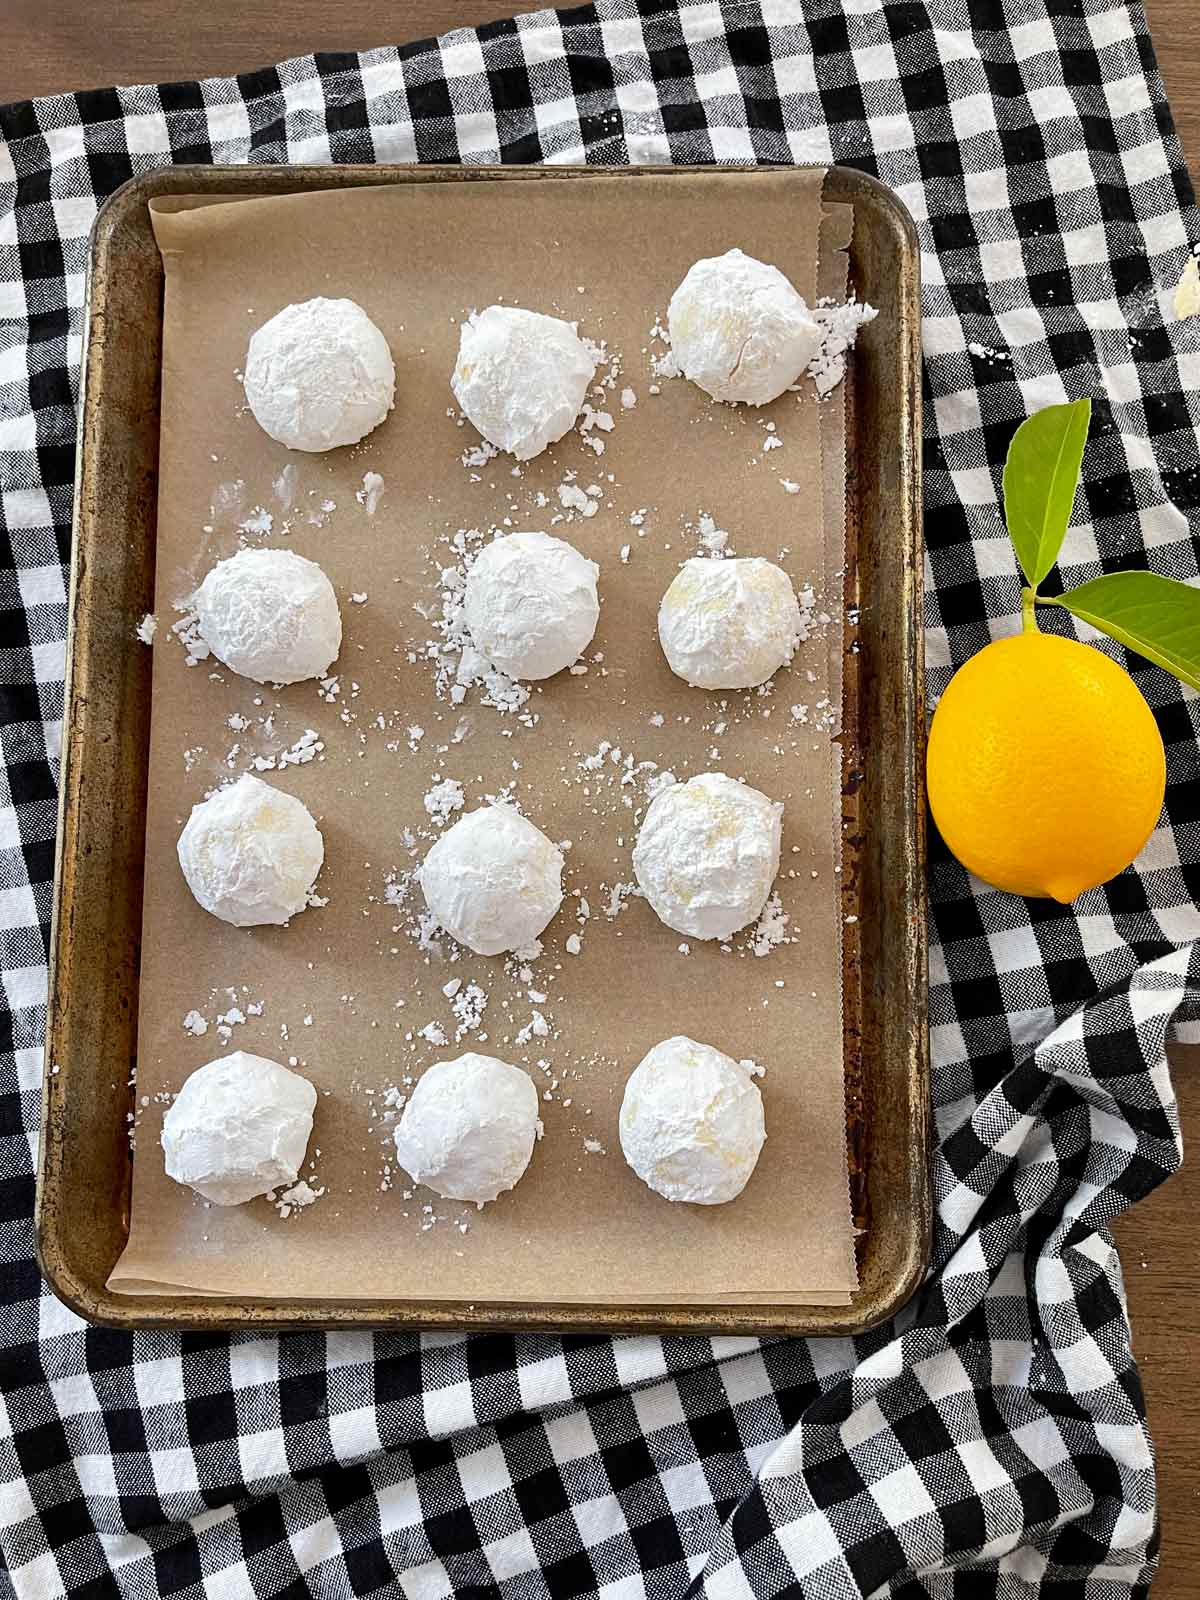 Powdered sugar coated dough balls on baking sheet ready for oven.